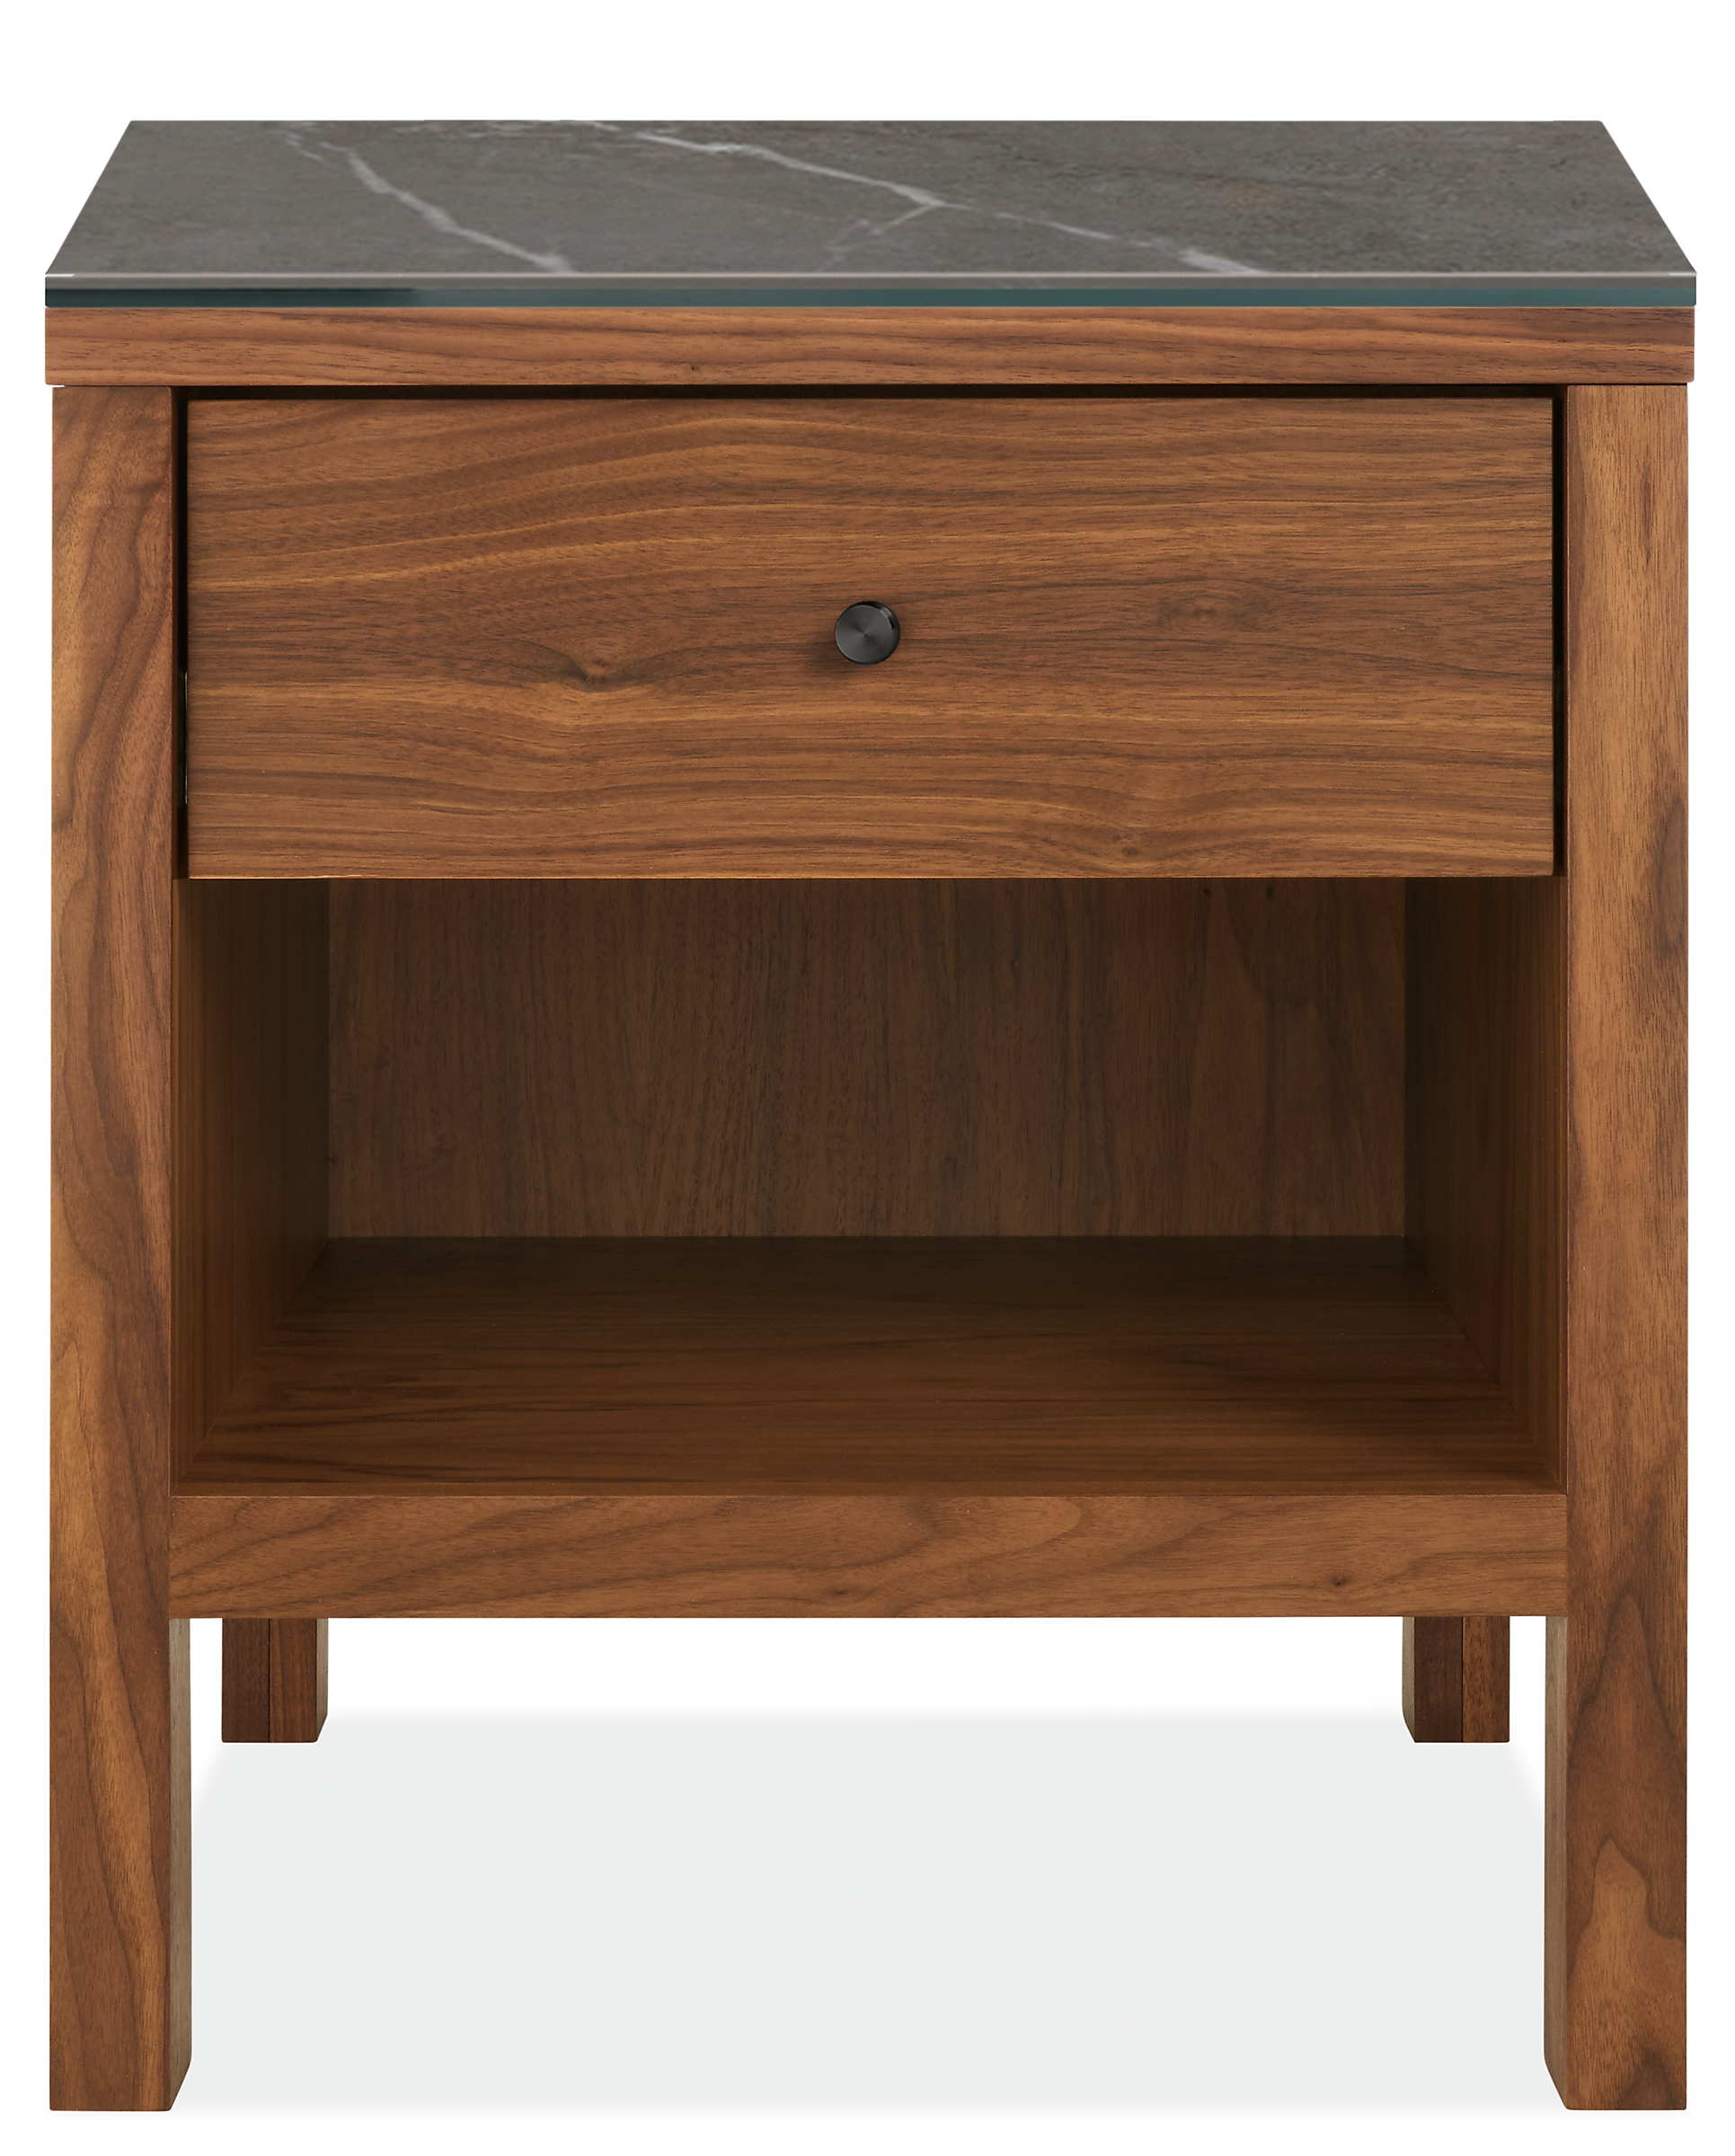 Emerson 20w 20d 22h One-Drawer Nightstand with Top Option